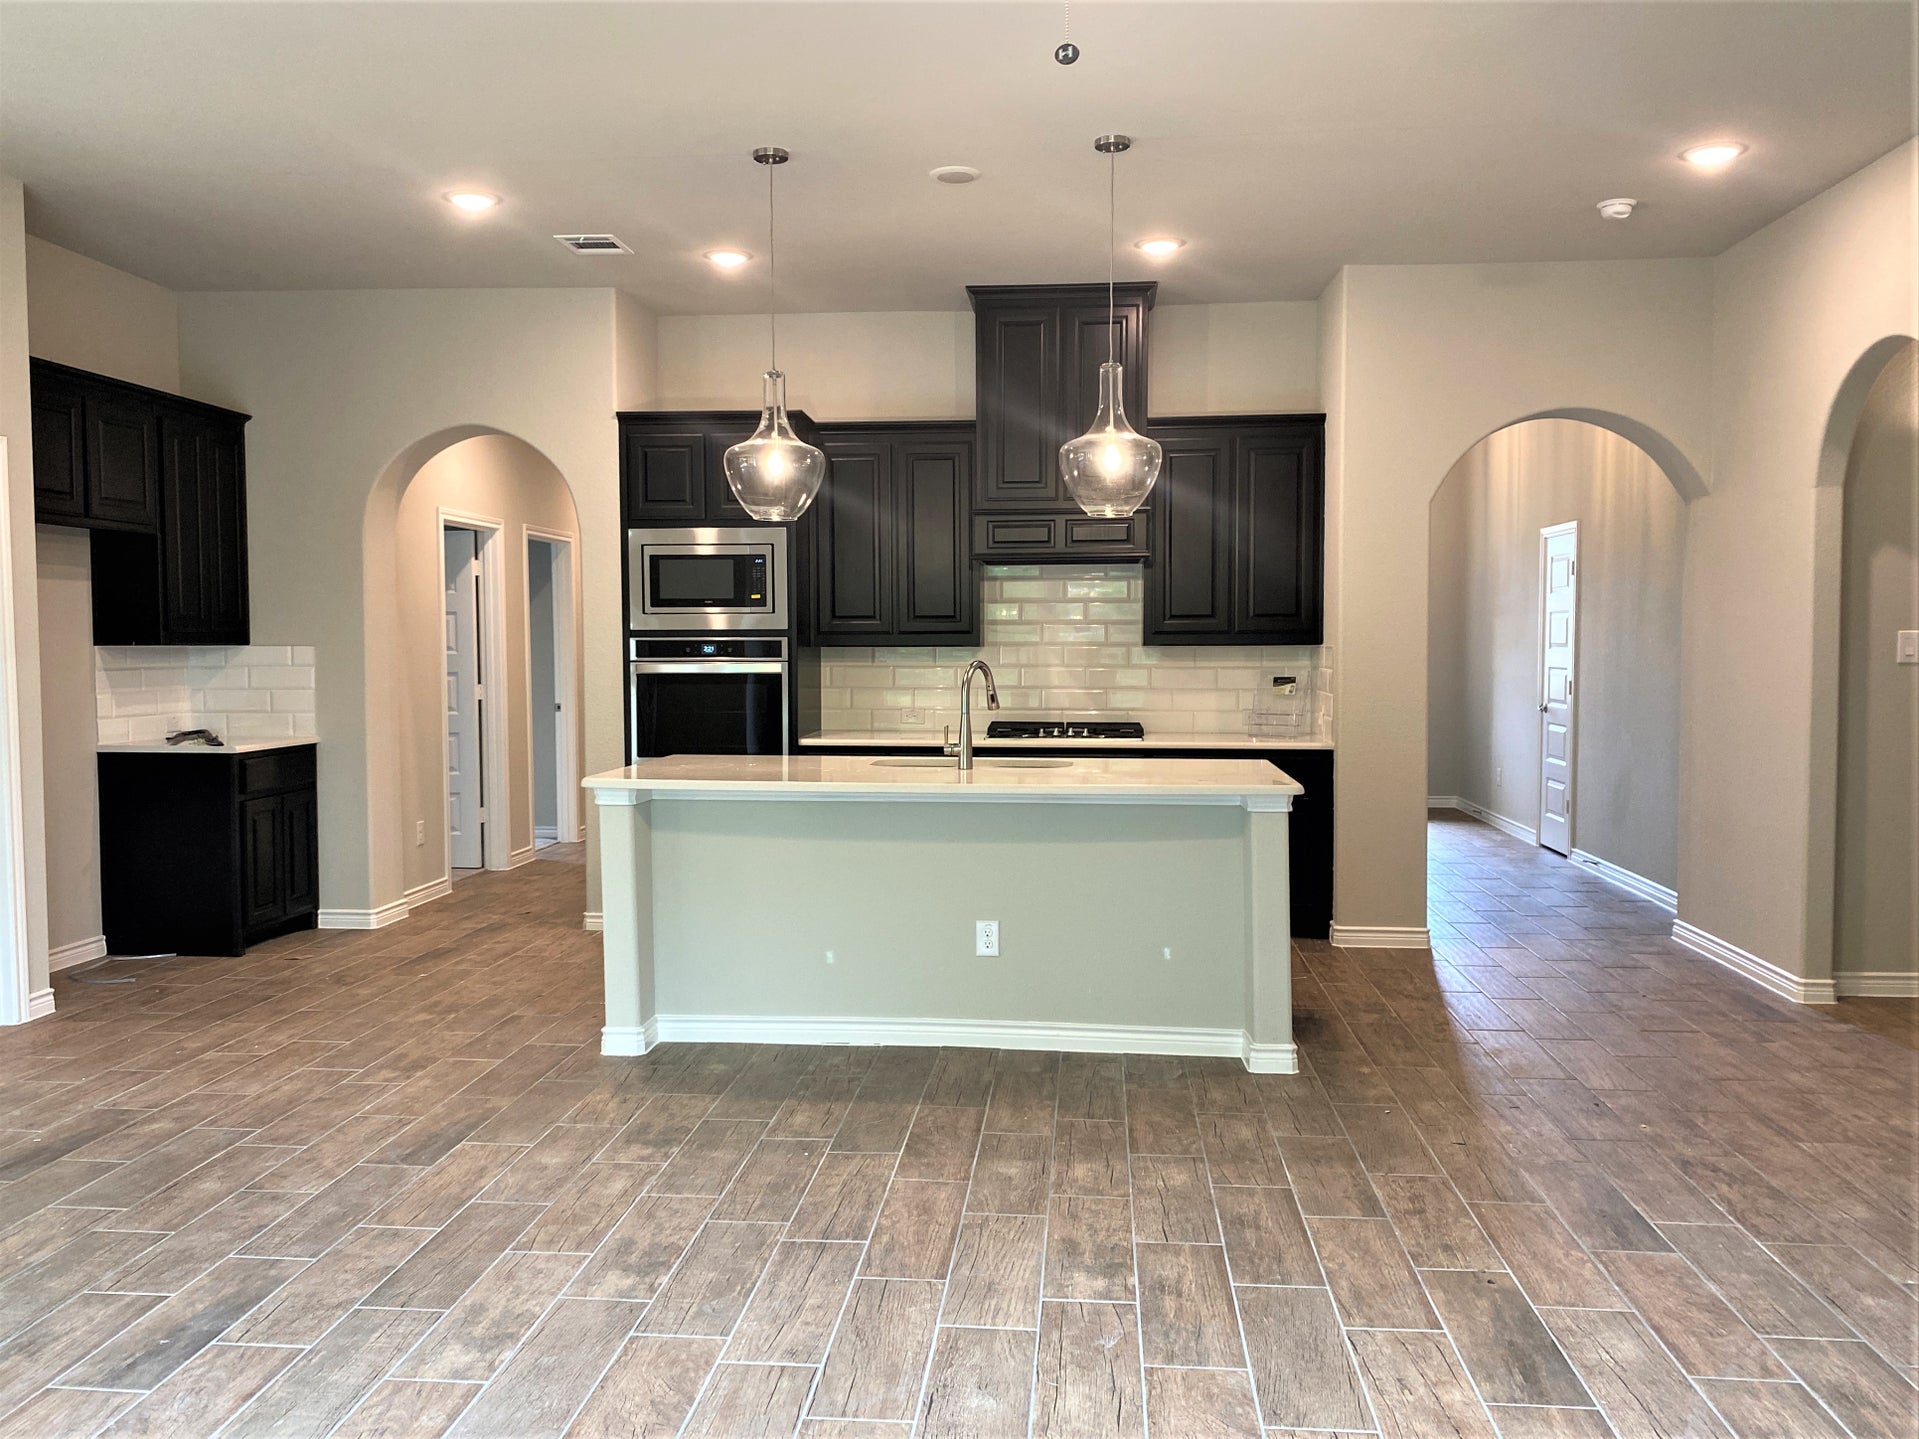 2,404sf New Home in Burleson, TX